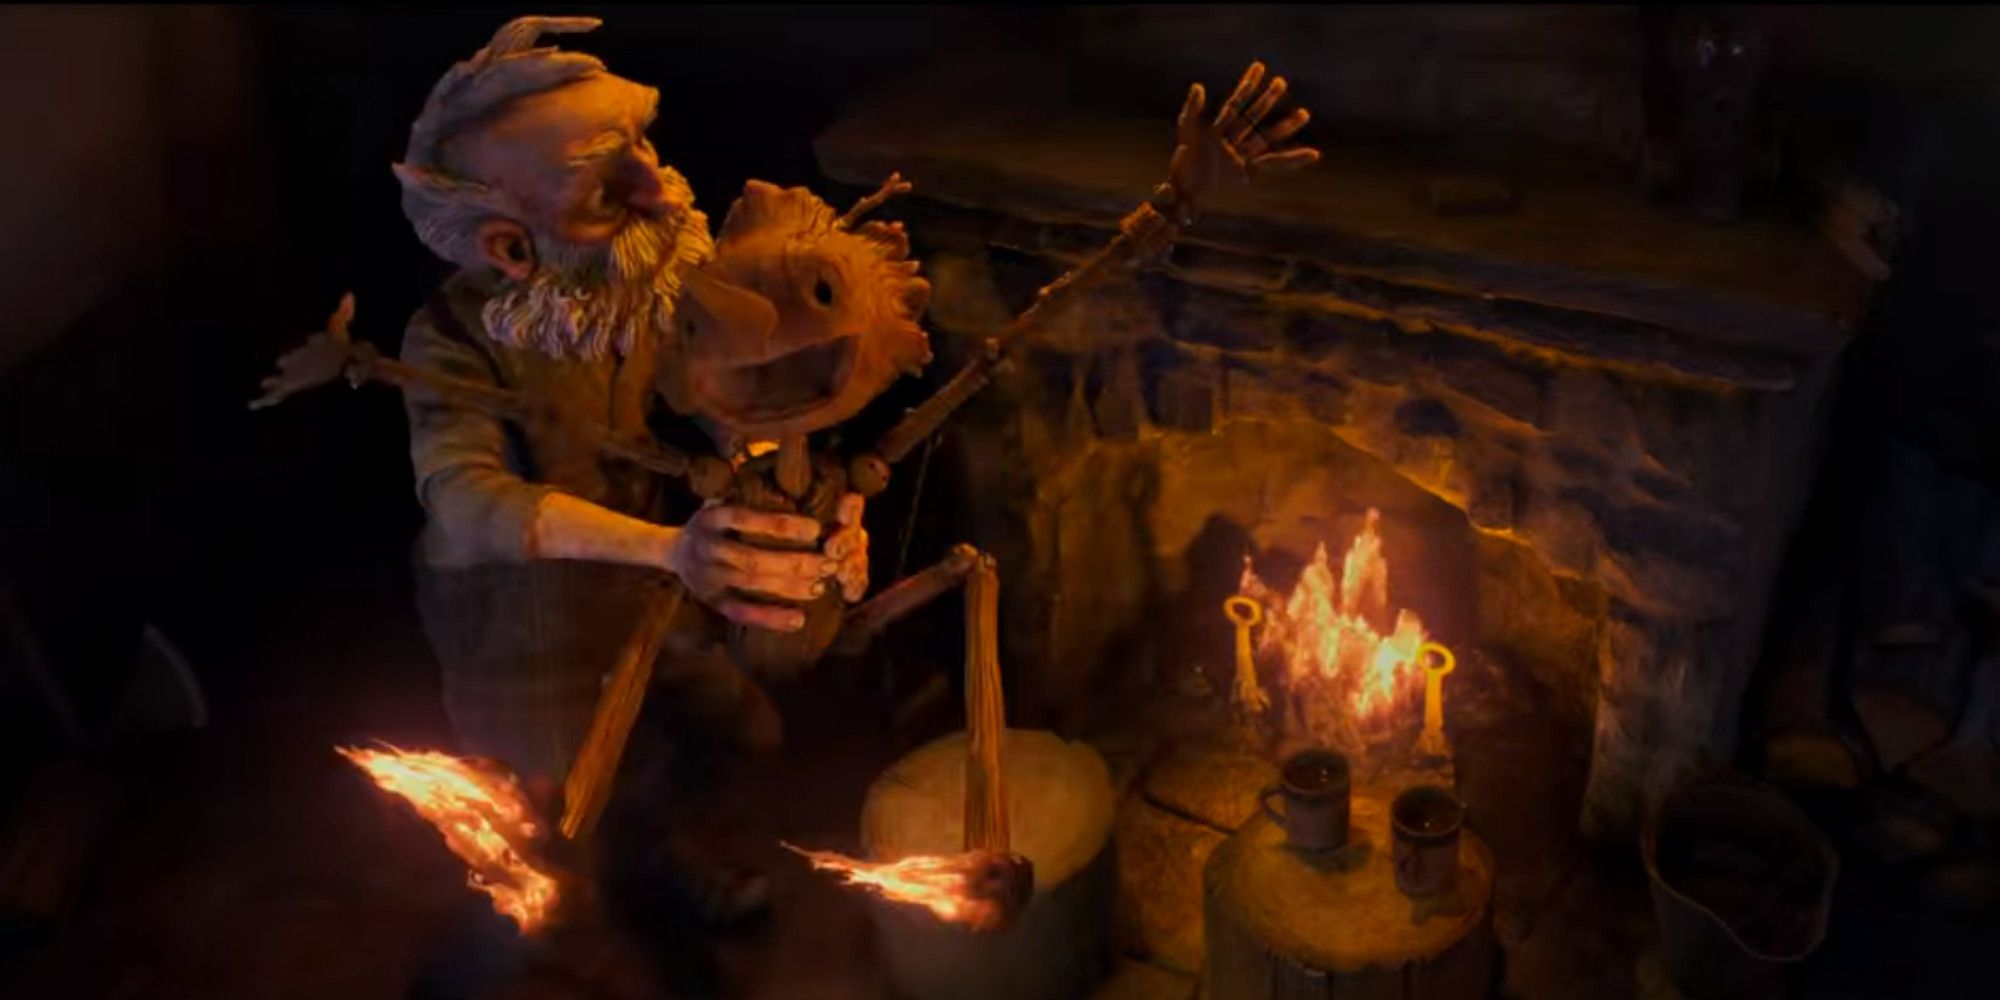 Best Things About Guillermo Del Toro's Pinocchio Comedy